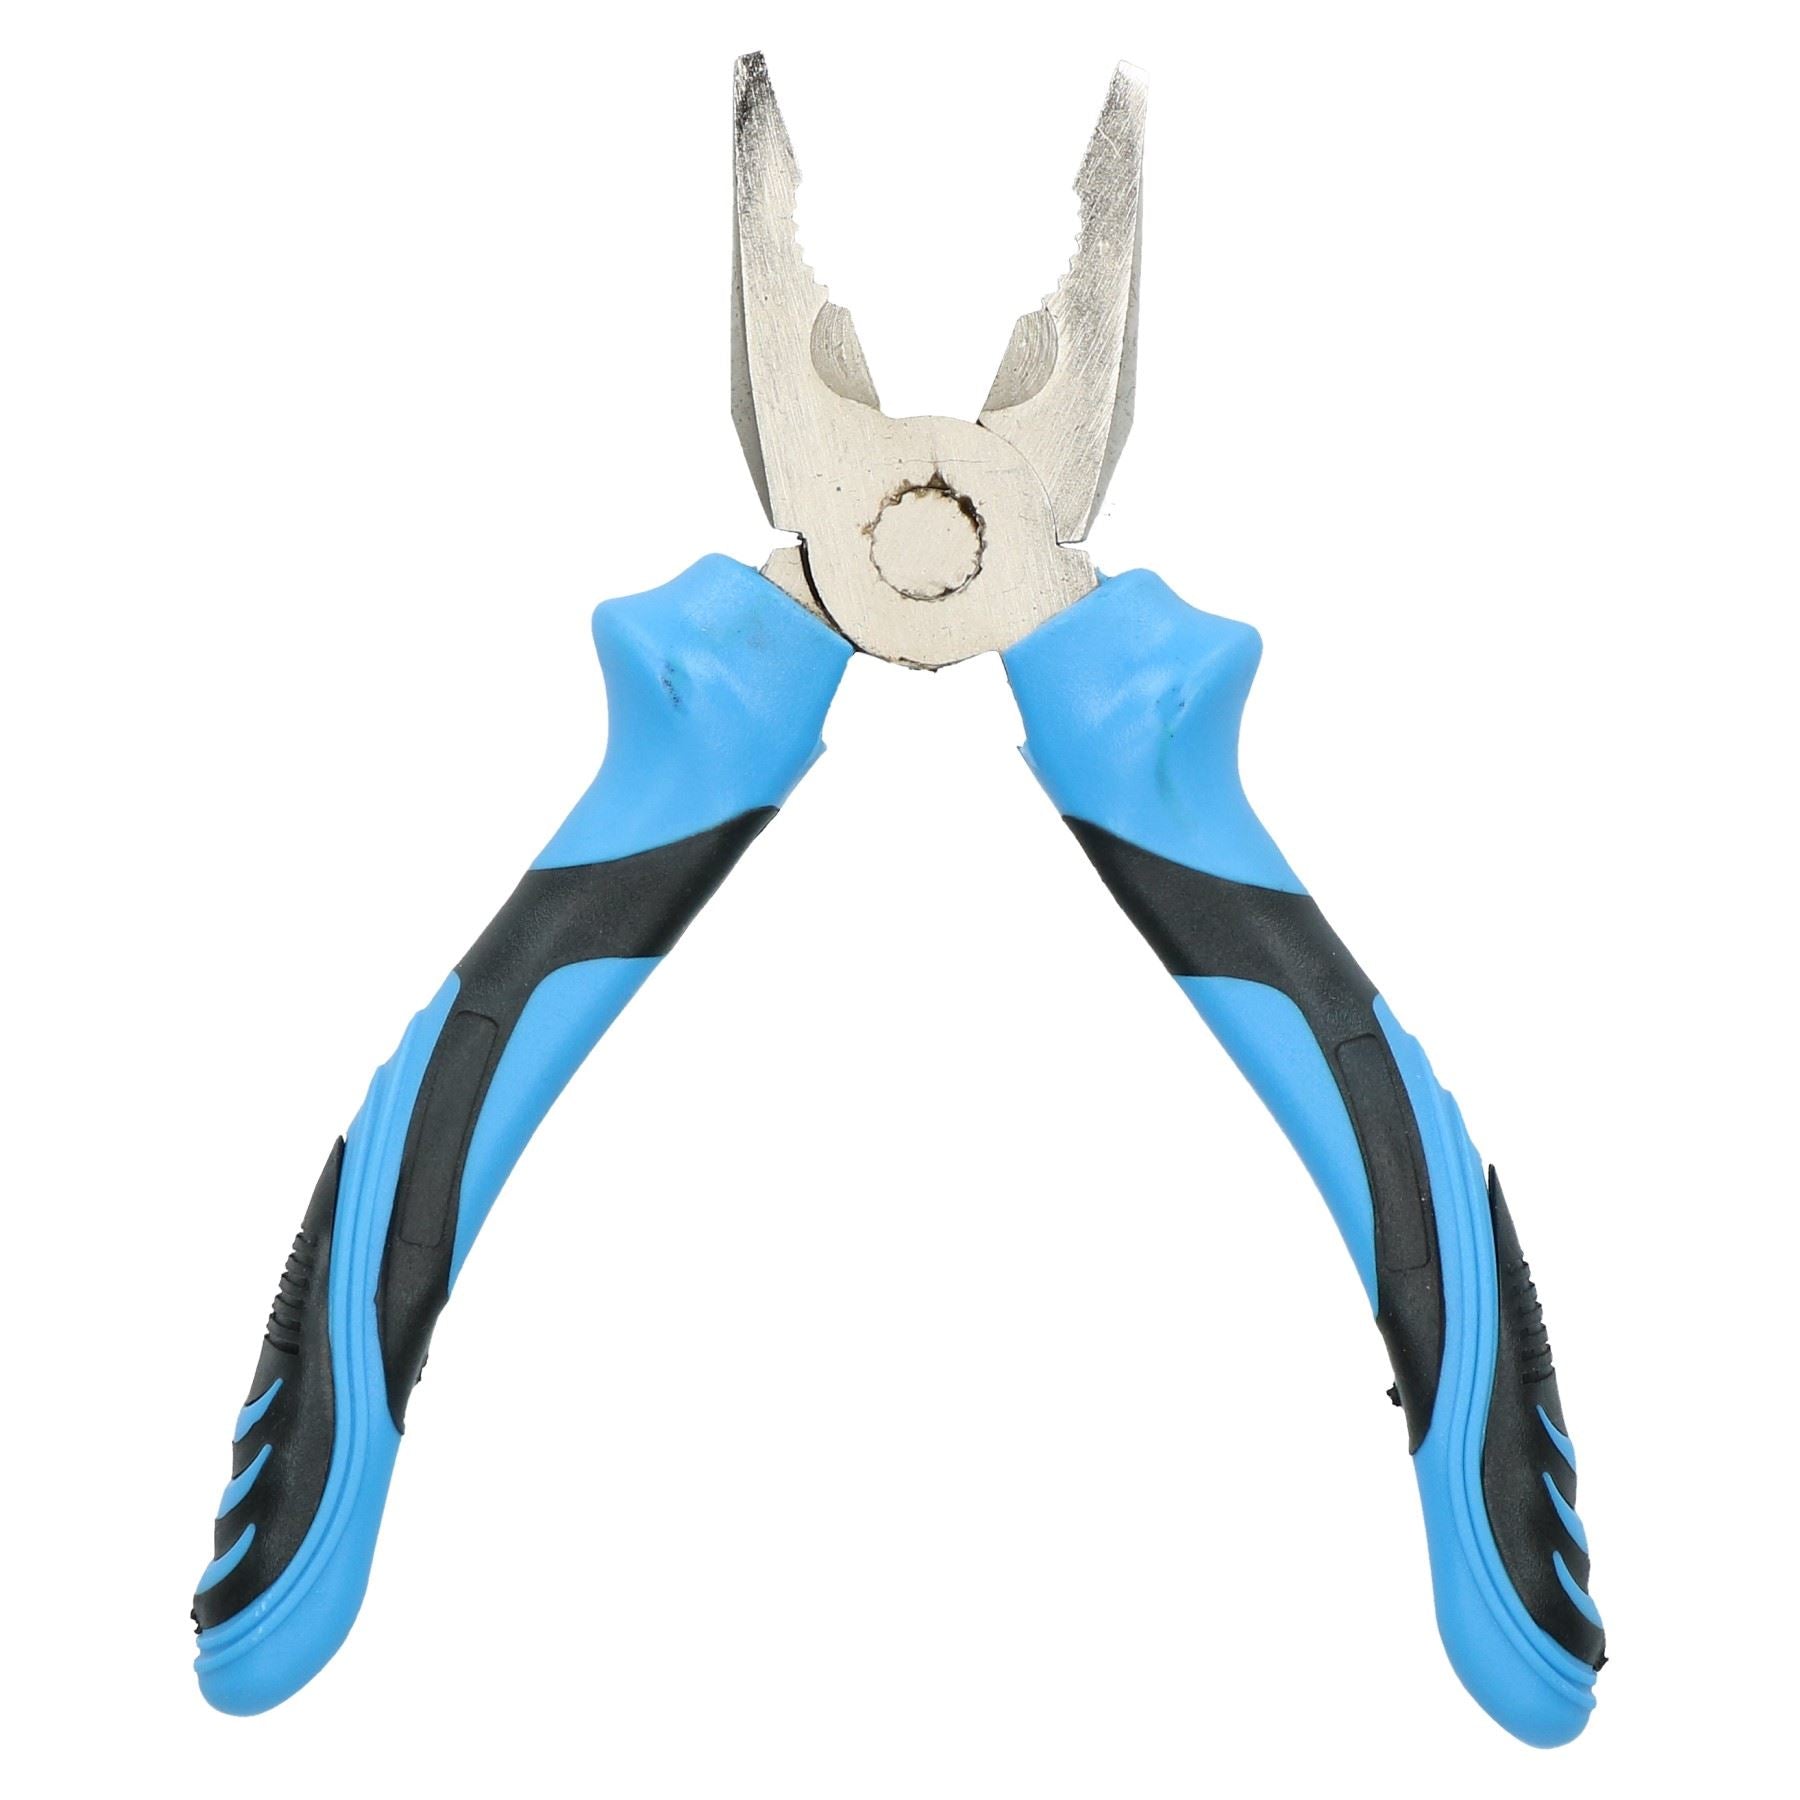 6" / 150mm Combination Combo Engineers Pliers Anti Slip Soft Grip High Leverage